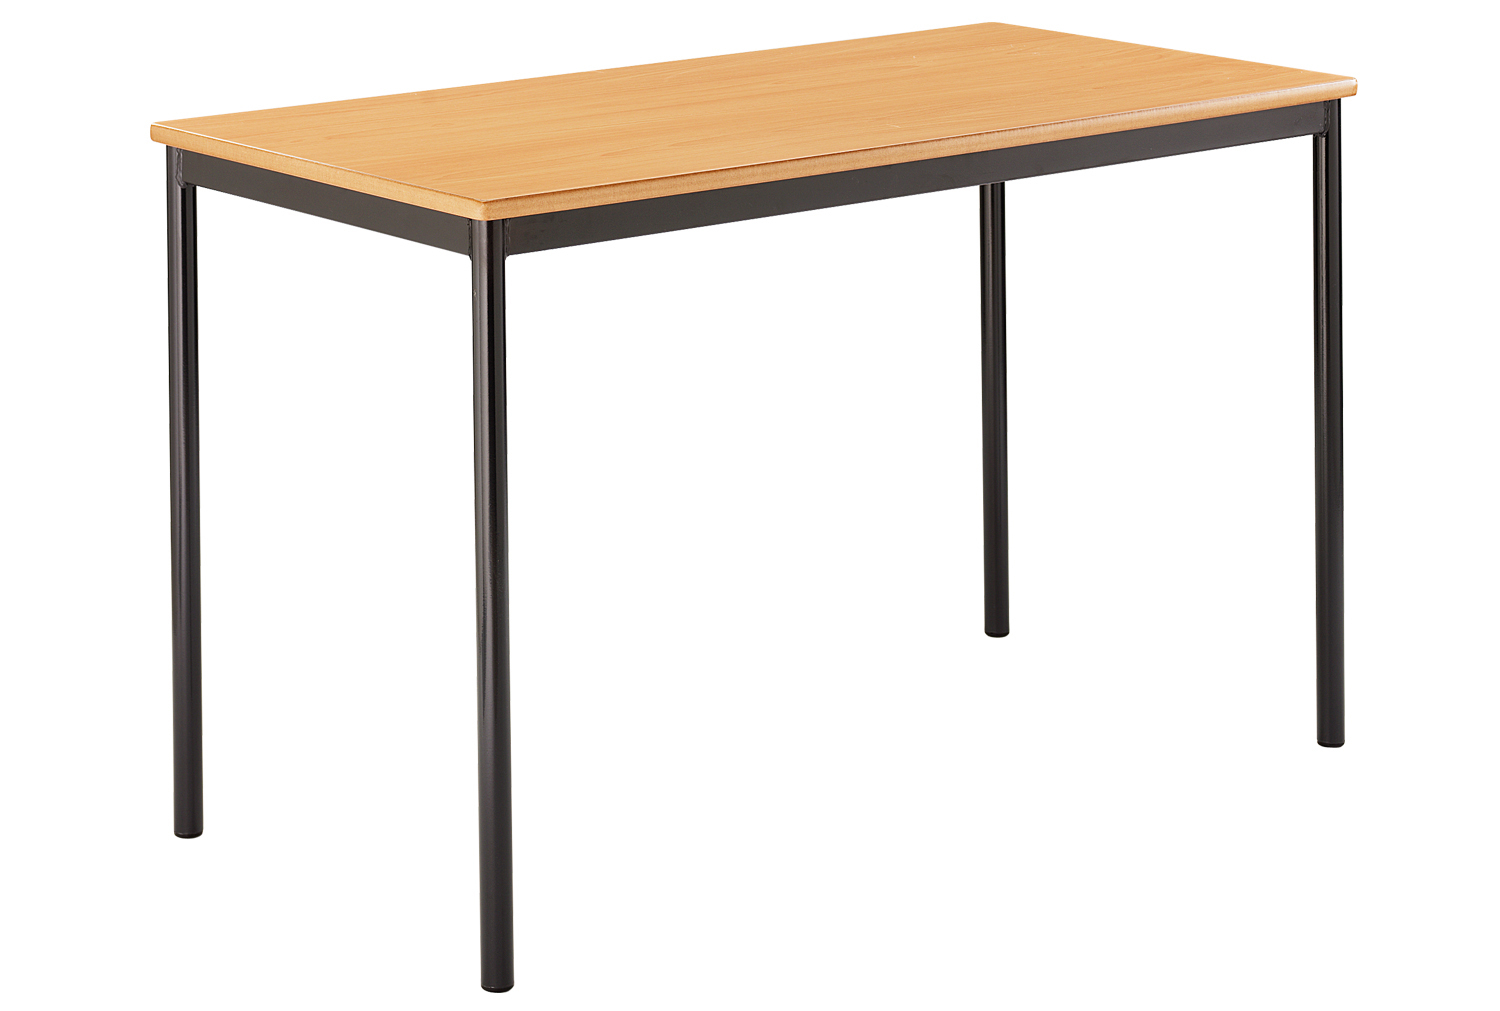 Rectangular Fully Welded Classroom Tables 11-14 Years